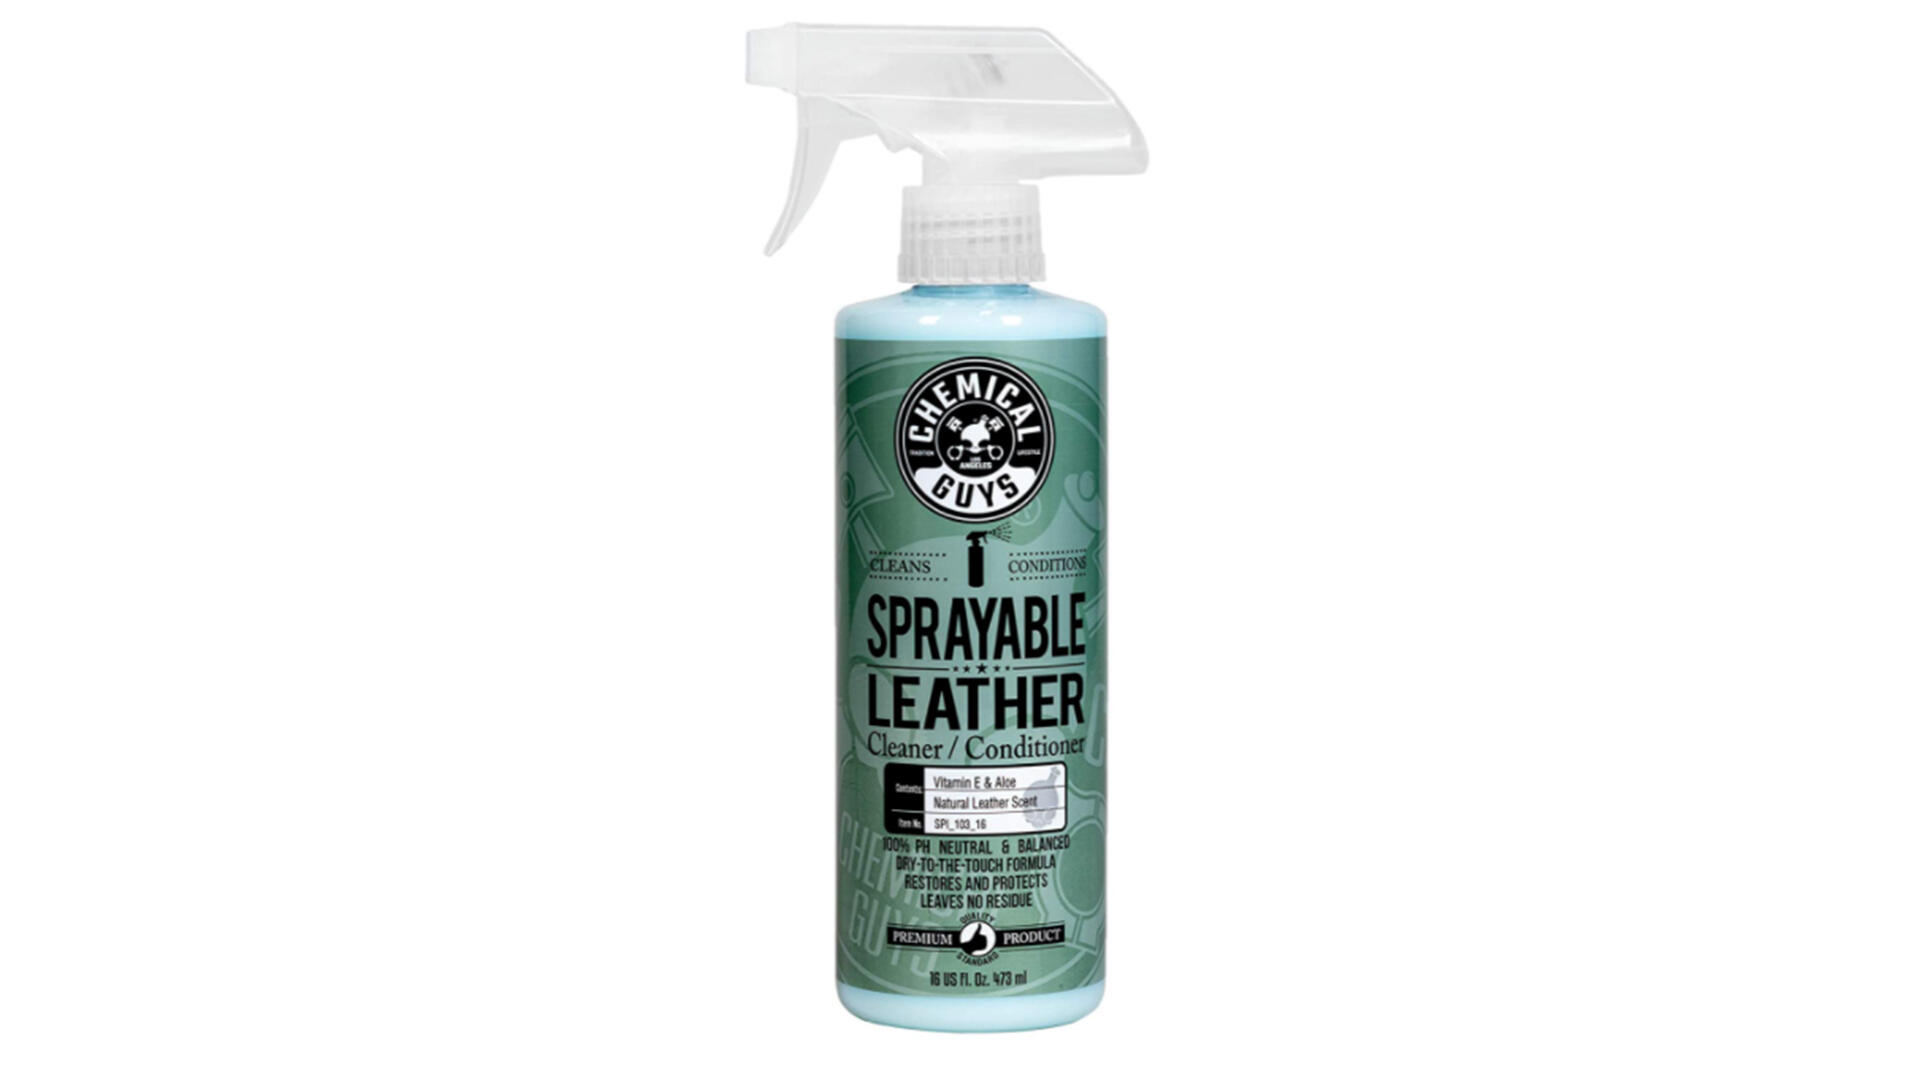 Best Leather Cleaners and Conditioners for Cars 2022: Lexol, 3D and More -  CNET